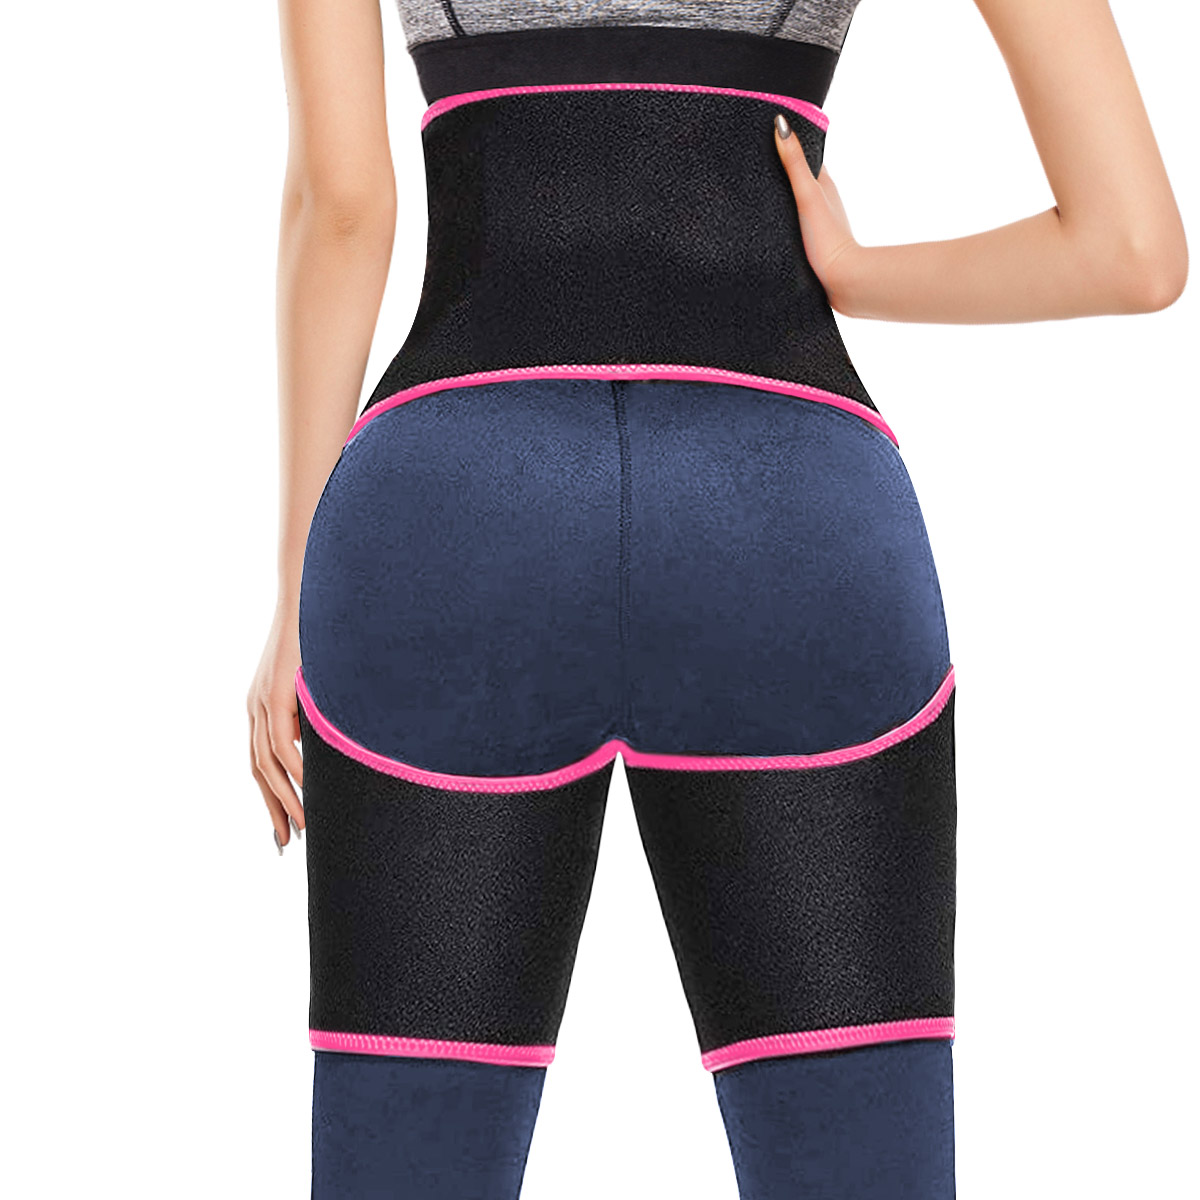 3-in-1-Waist-Thigh-Trimmer-Hip-Enhancer-Waist-Trainer-Back-Proection-Gear-for-Shaping-Body-Slimbing--1741996-4